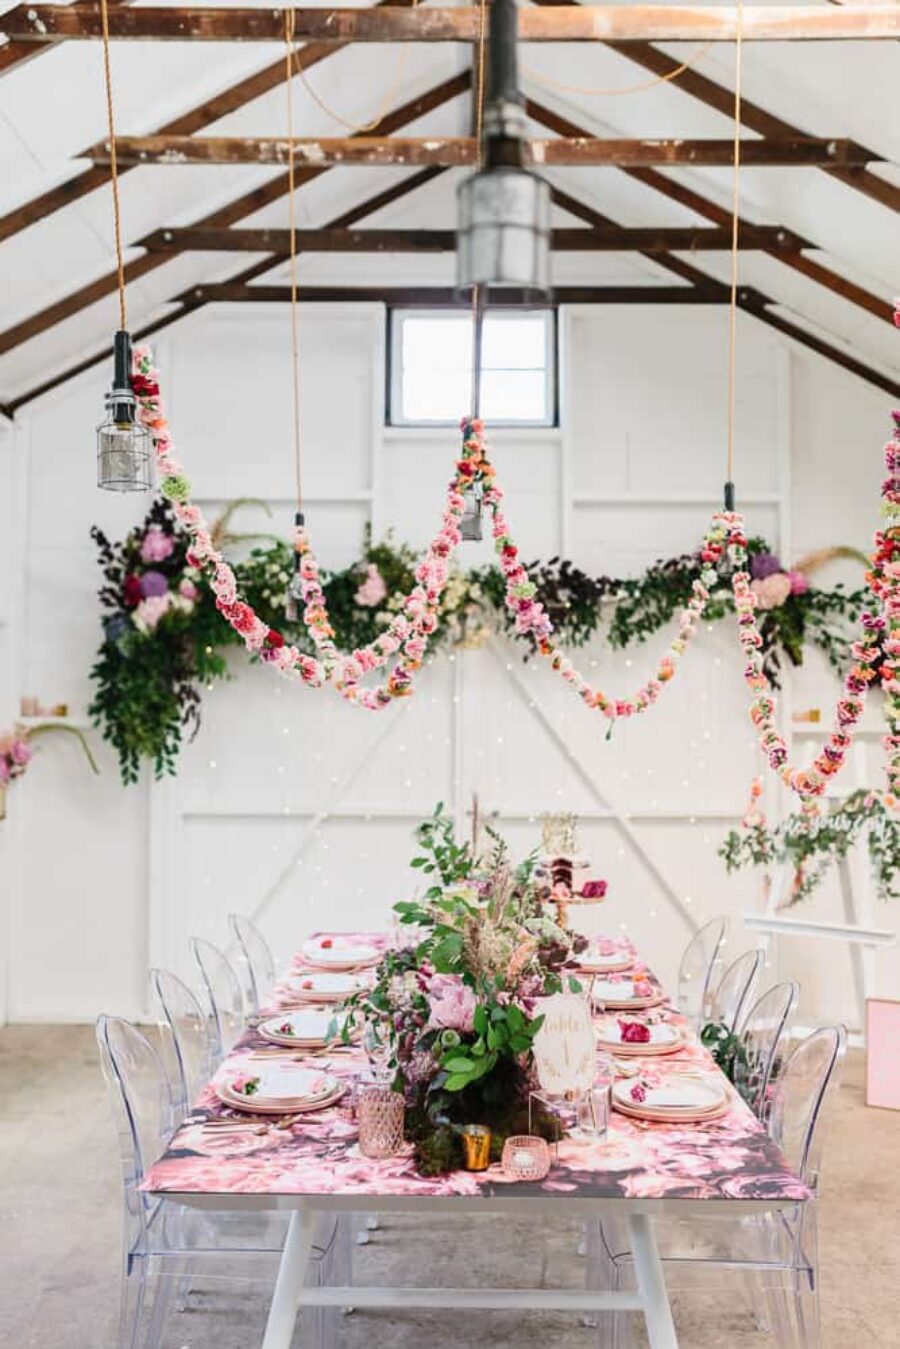 Floral tablescape with hanging floral garlands